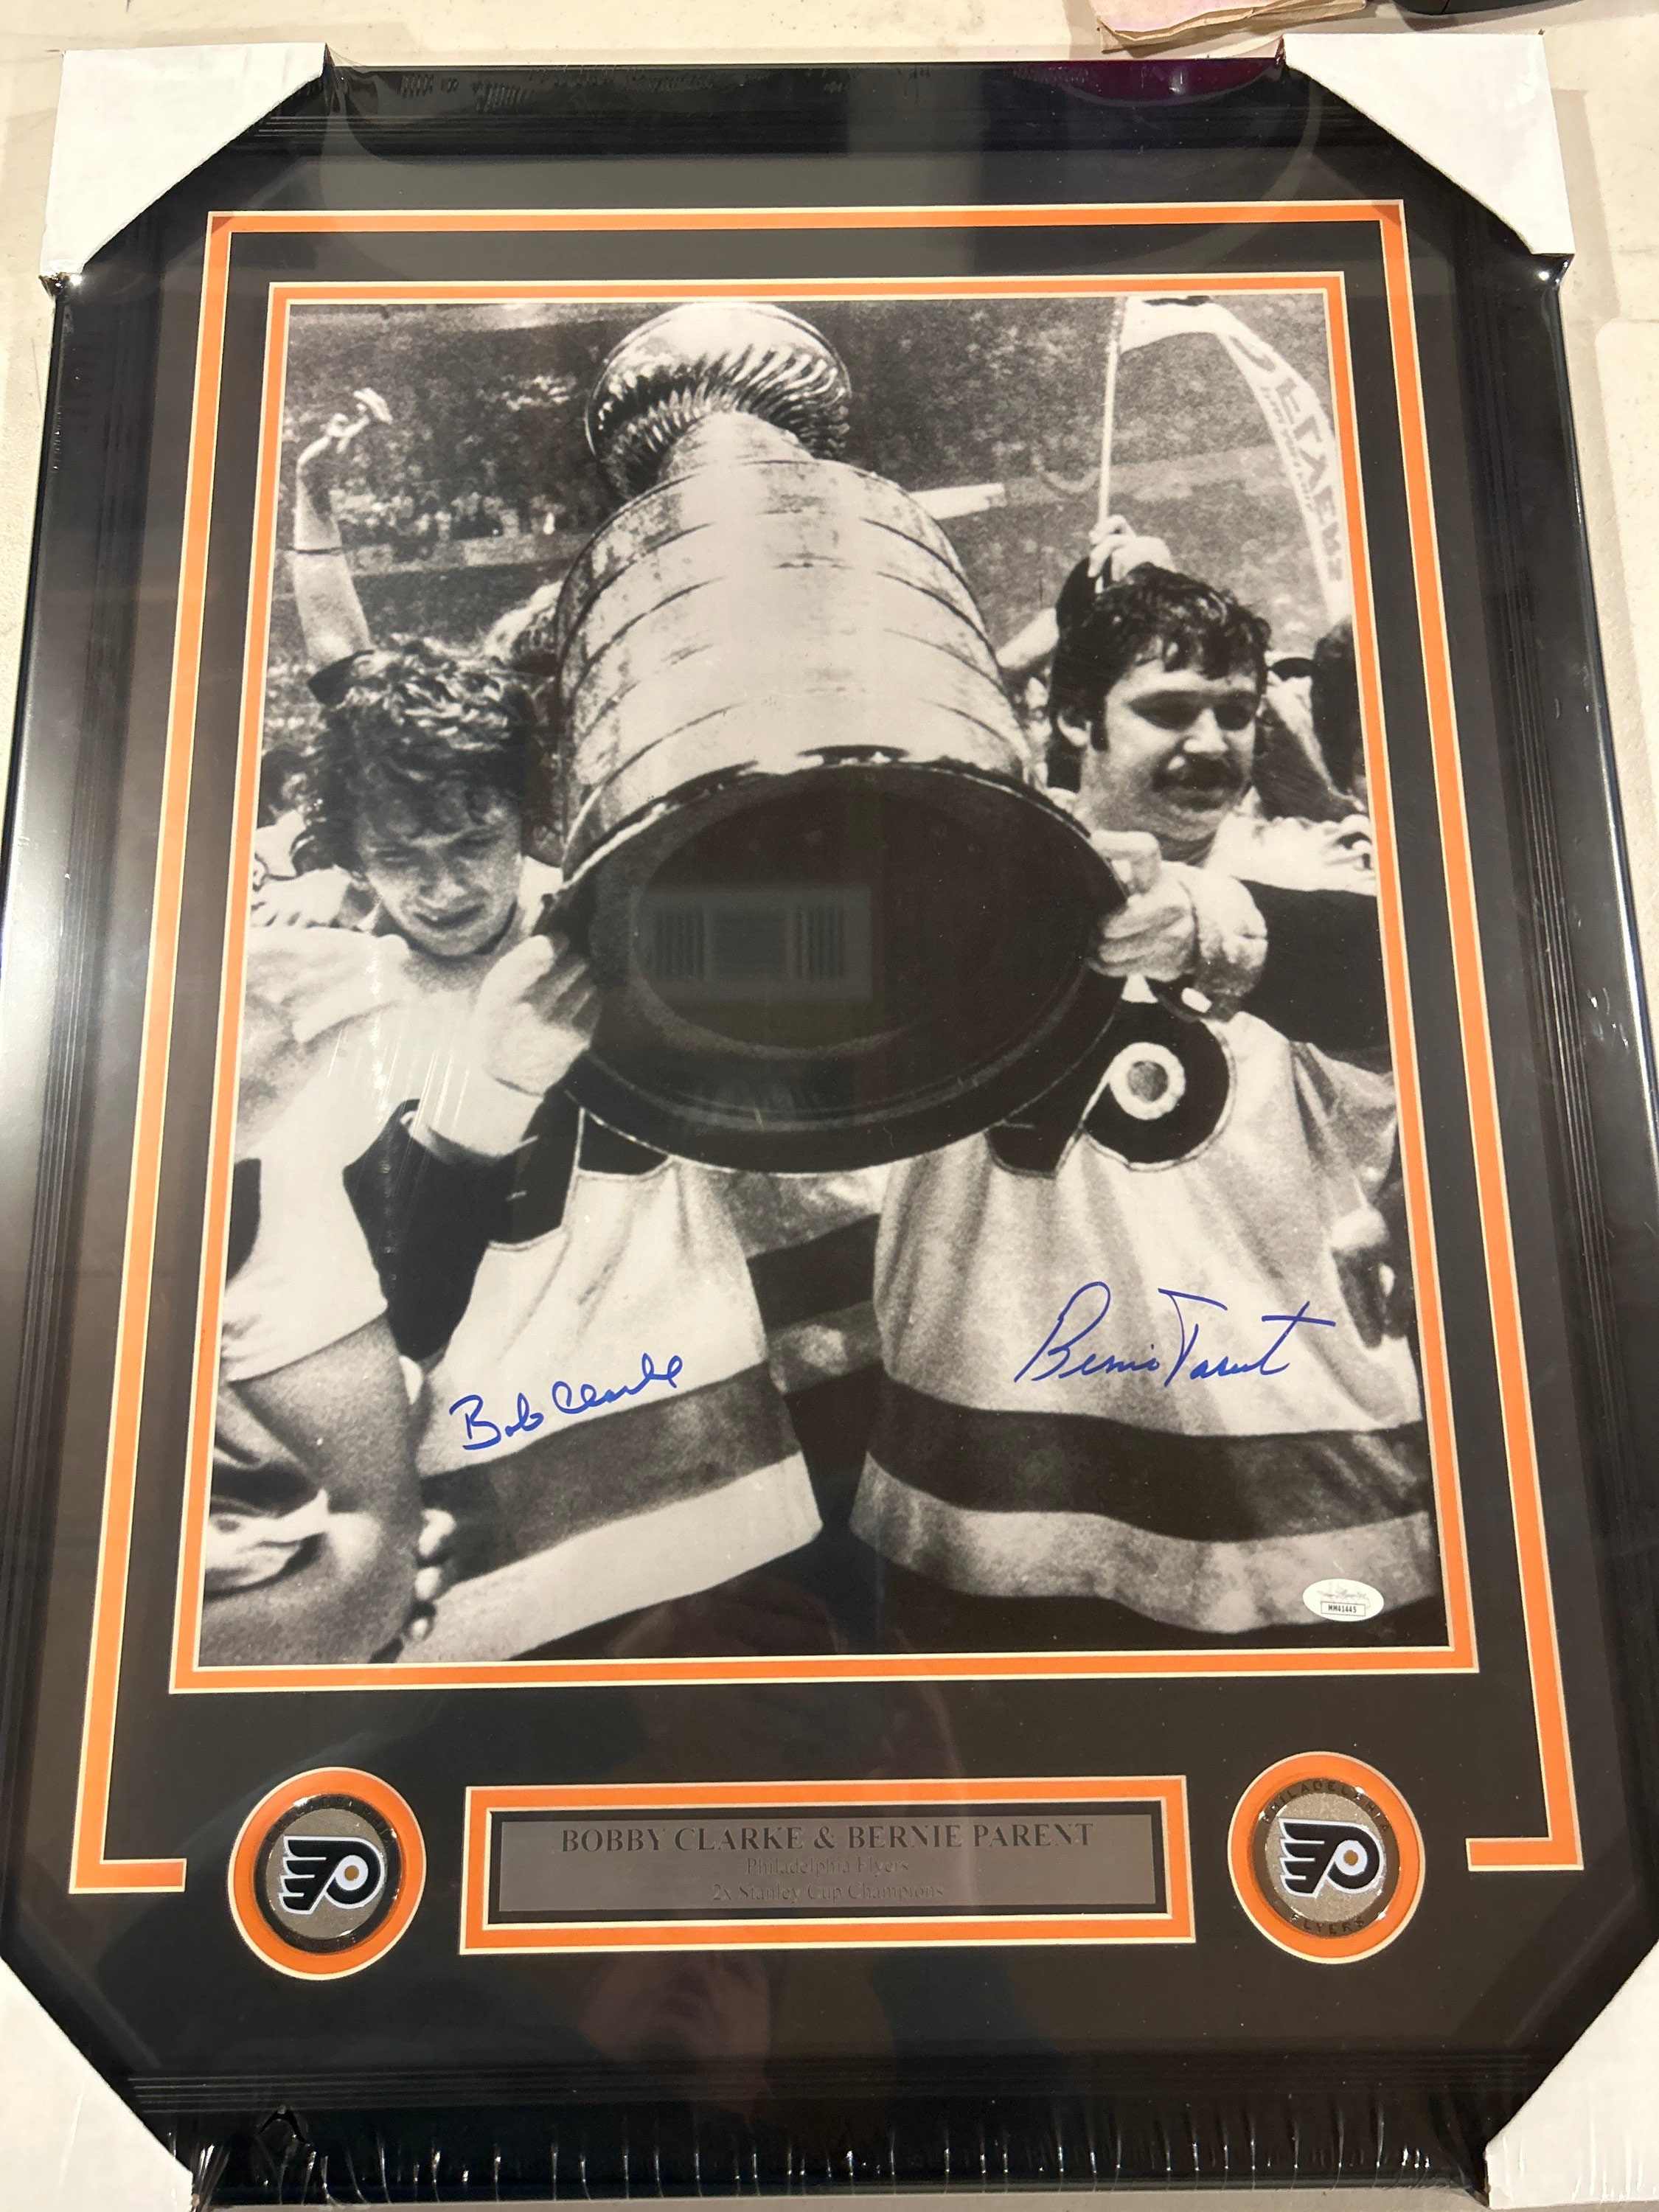 Bobby Clarke Autographed Memorabilia  Signed Photo, Jersey, Collectibles &  Merchandise